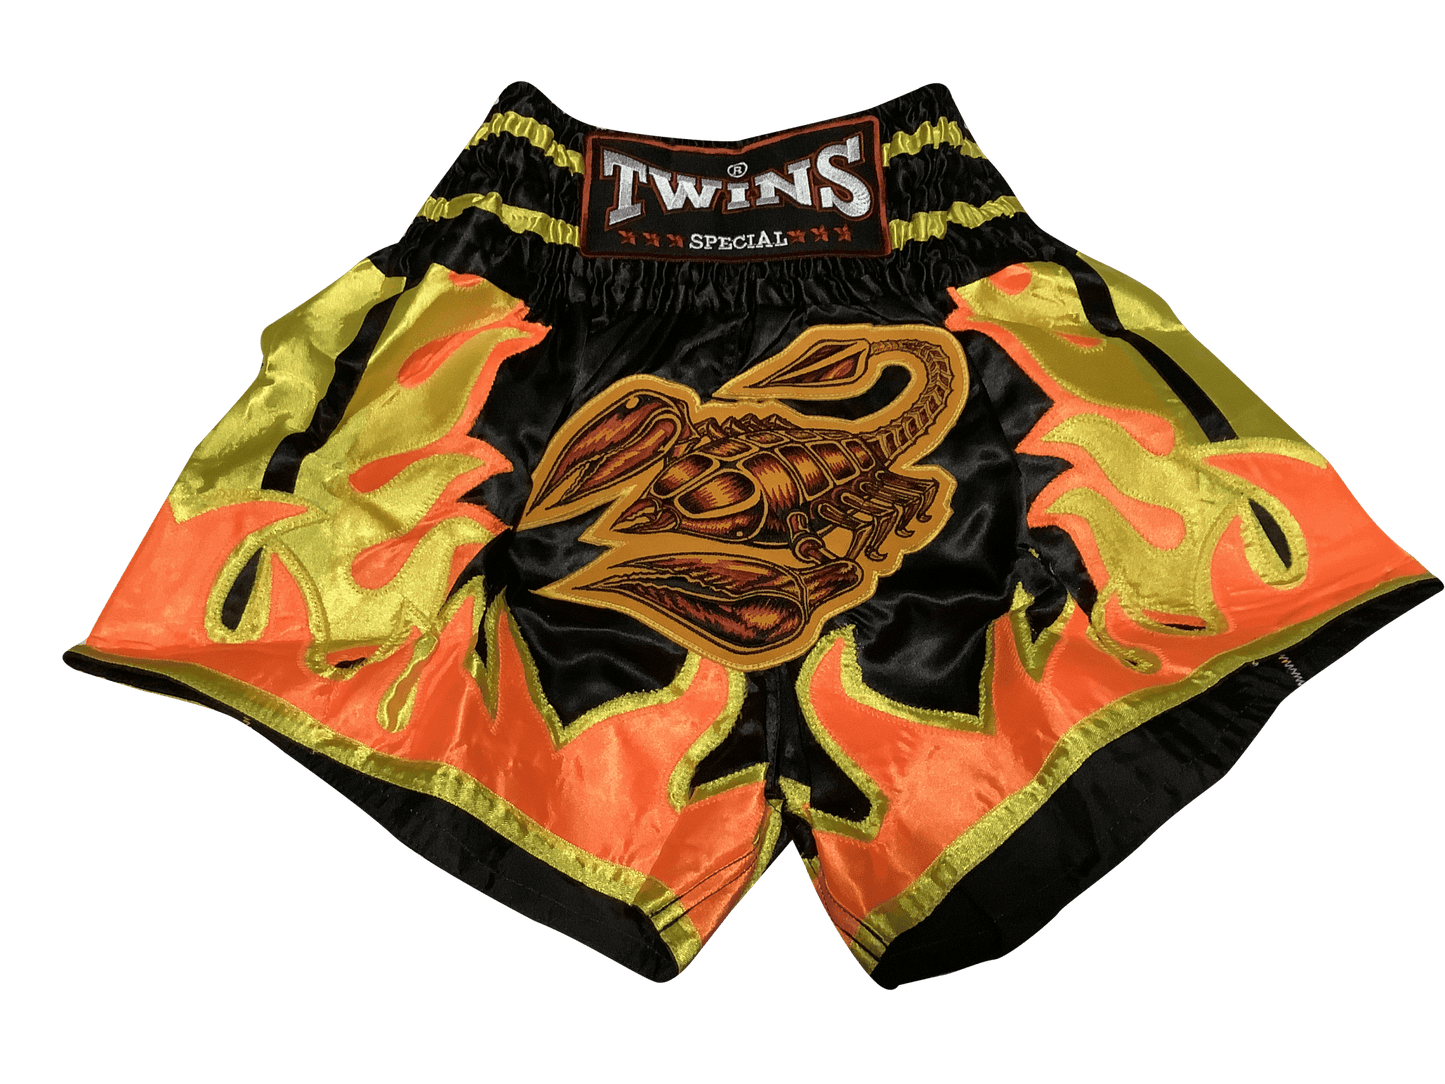 Twins Special Shorts TBS-12